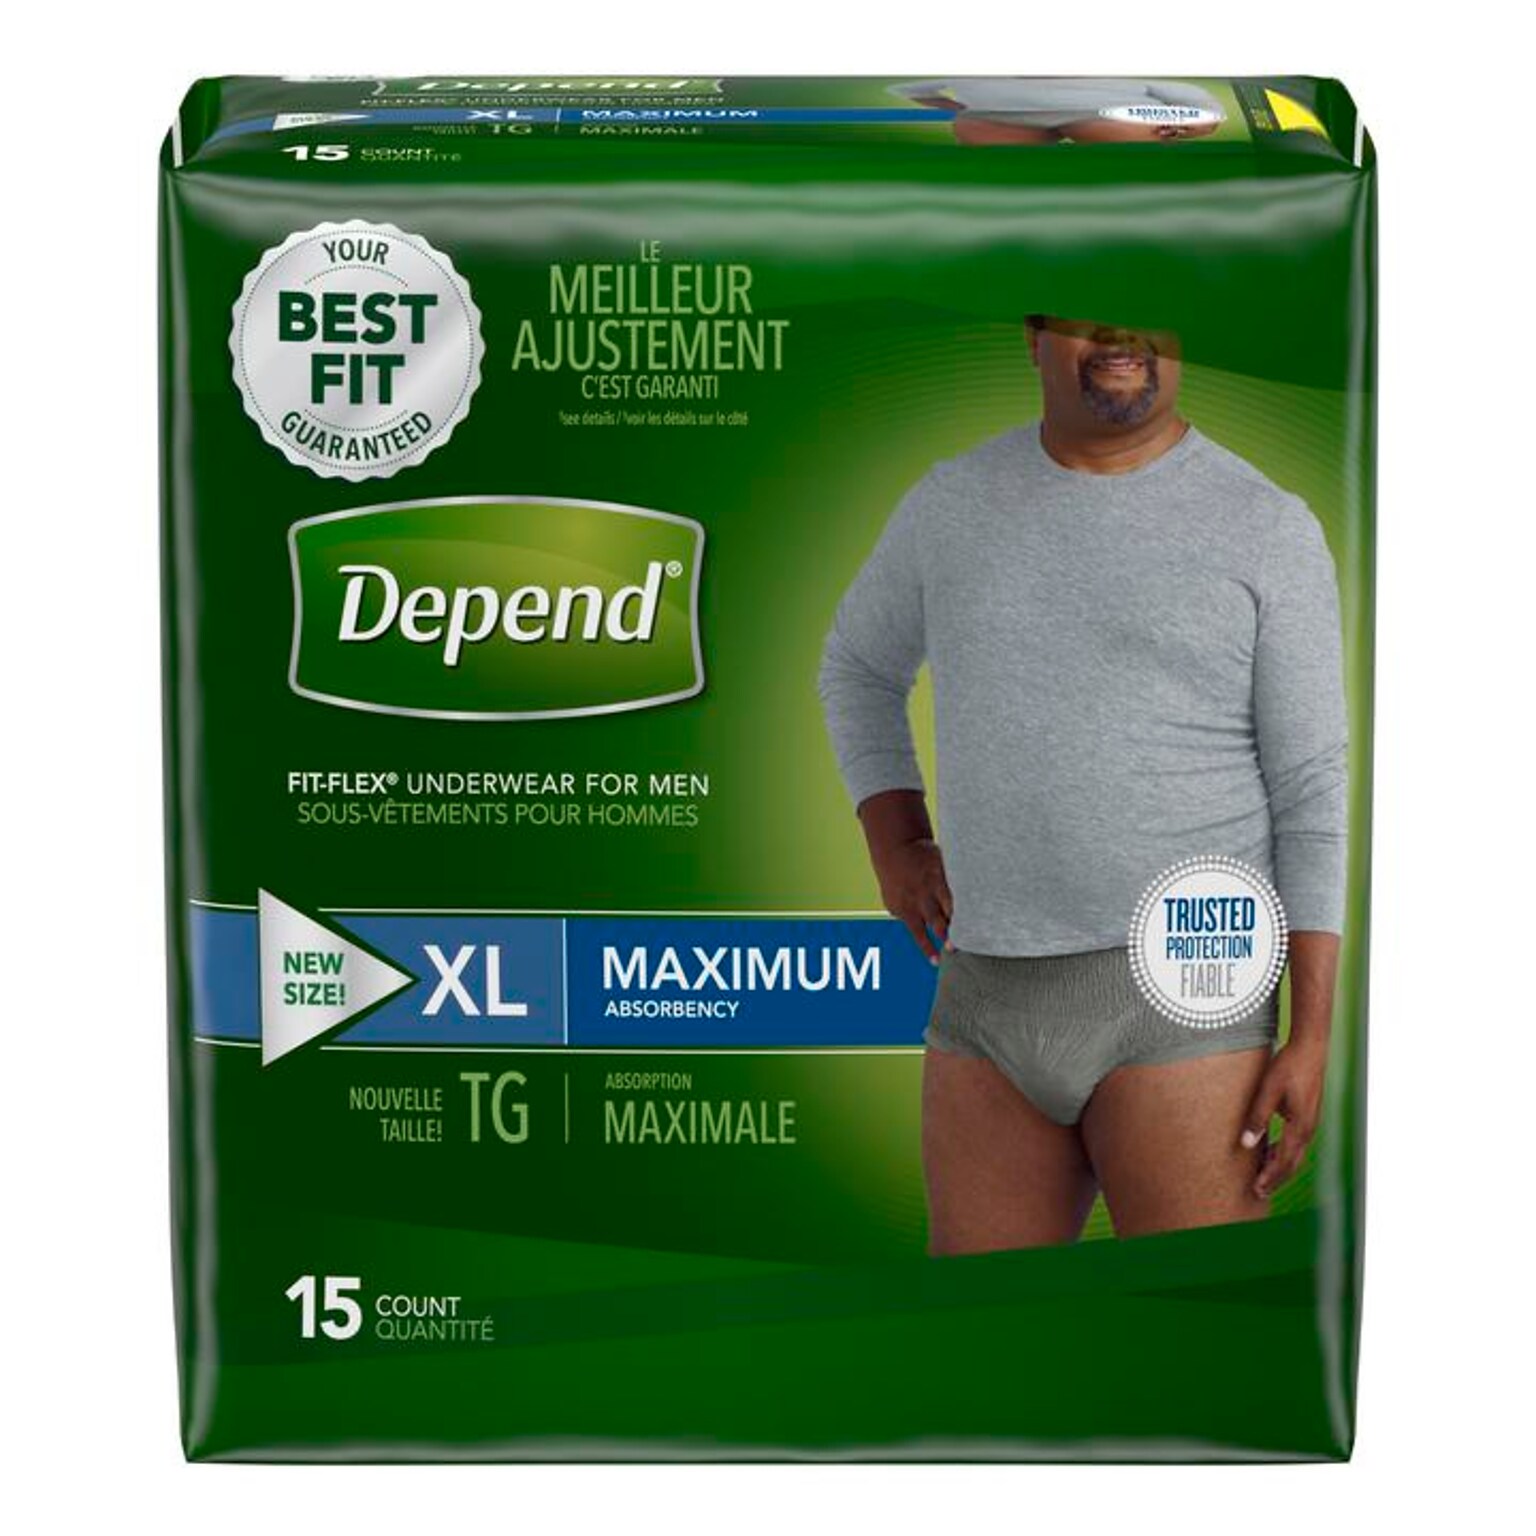 Depend FIT-FLEX Incontinence Underwear for Men, Maximum Absorbency, Extra Large, Gray (47930)